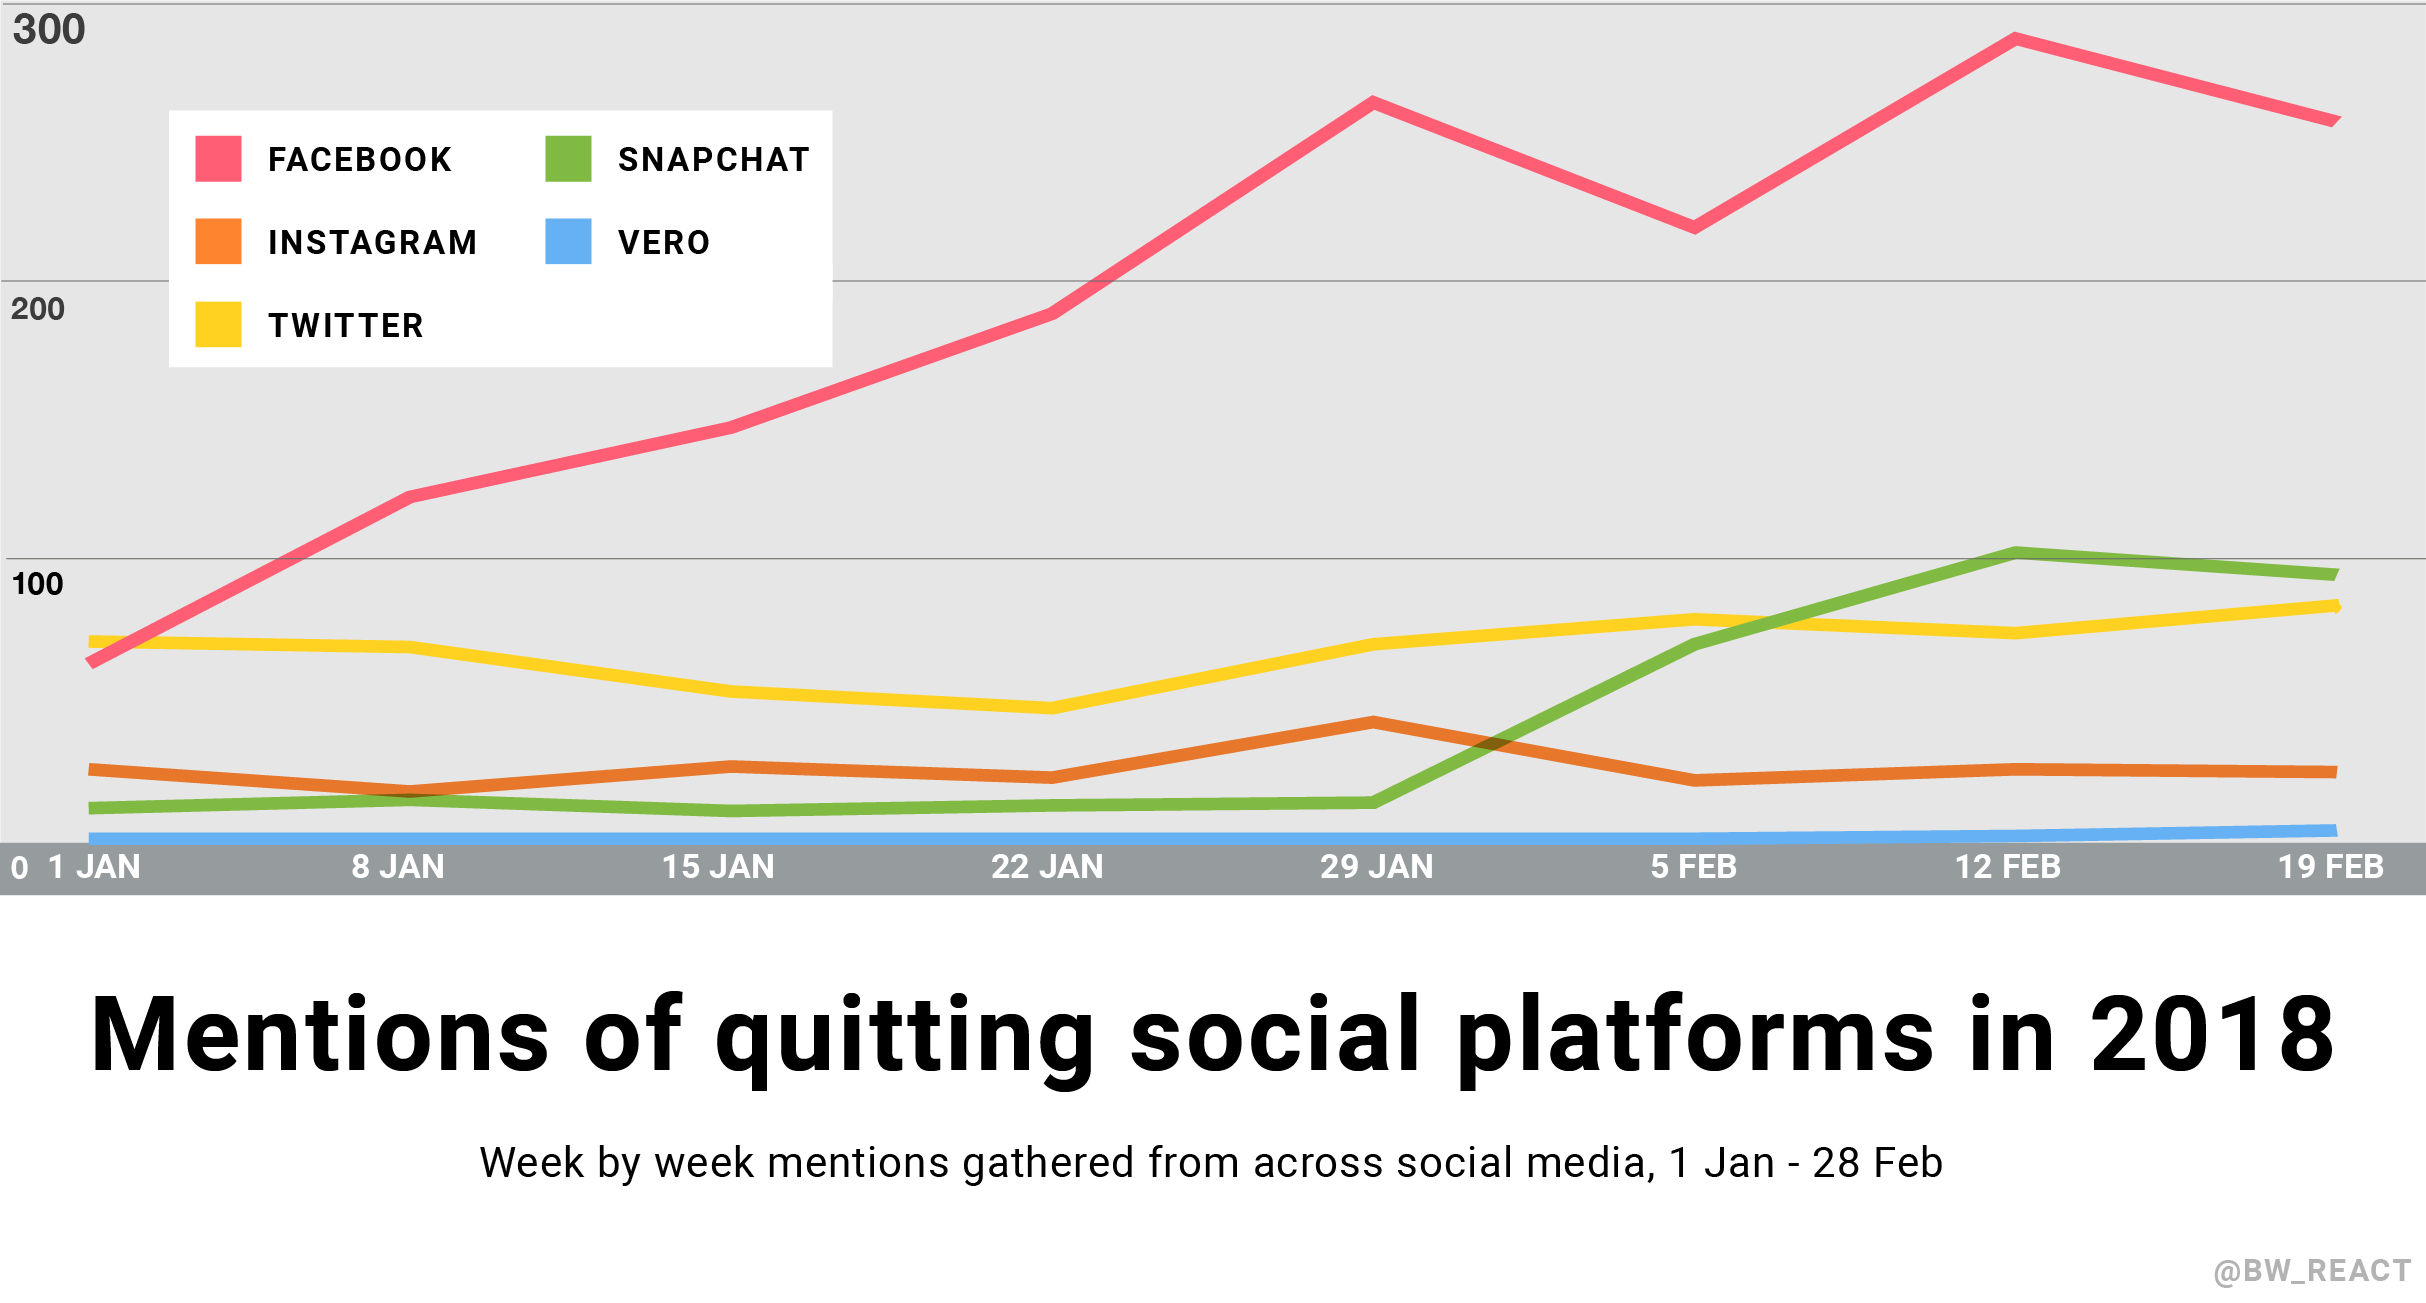 A line chart looks at quitting social media mentions over time, week by week. Snapchat's quitting mentions see an uptick in February, and Facebook's grow most weeks.